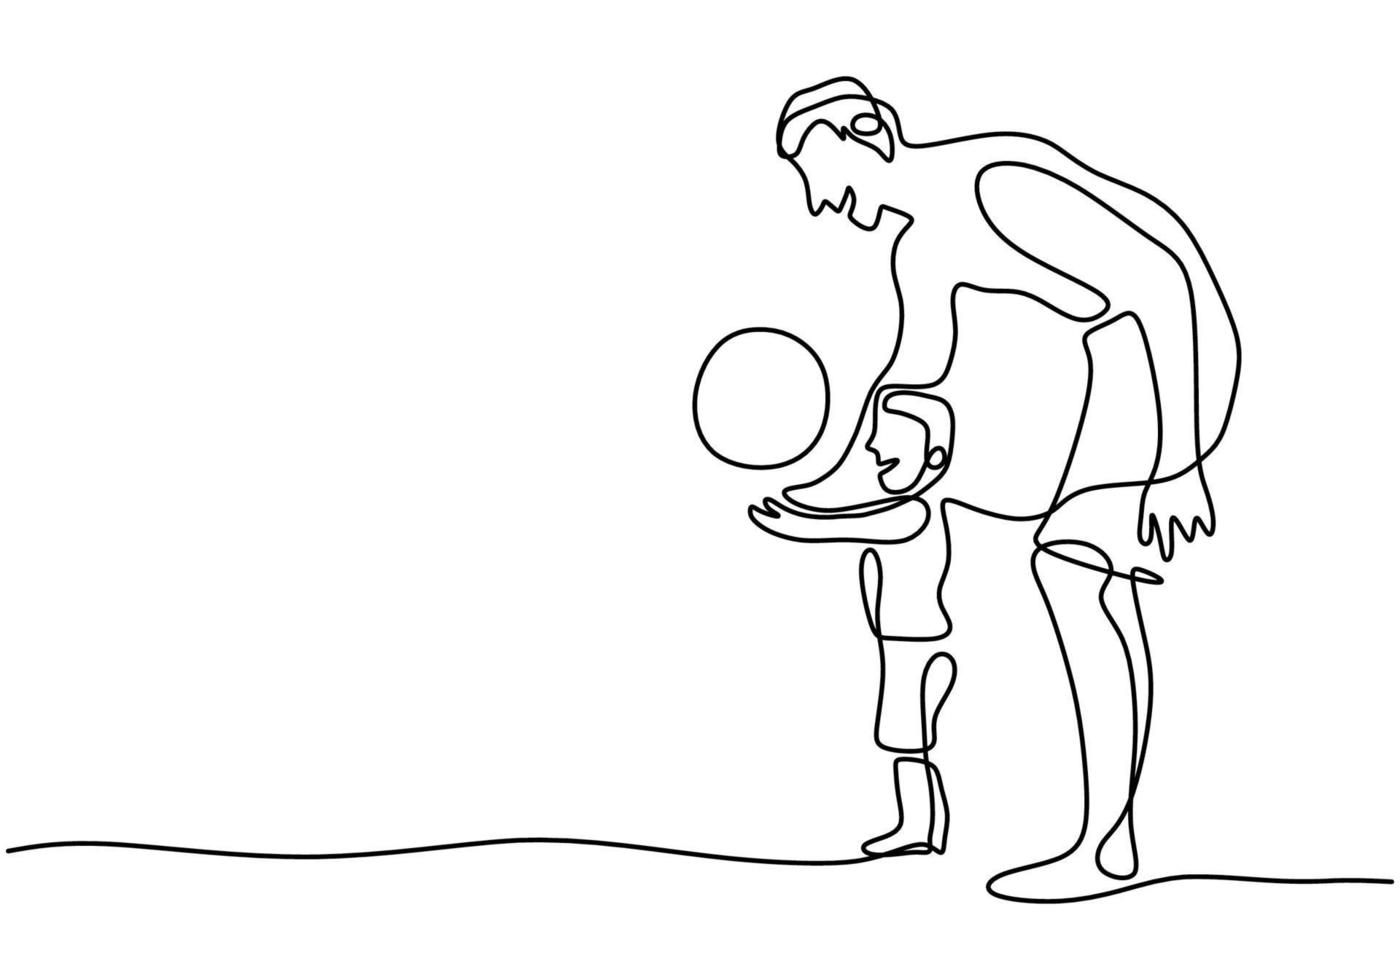 One single line drawing of young father with son play football at the beach. A dad plays with his son for the holidays. Happy parenting learning concept hand drawn art minimalist design vector